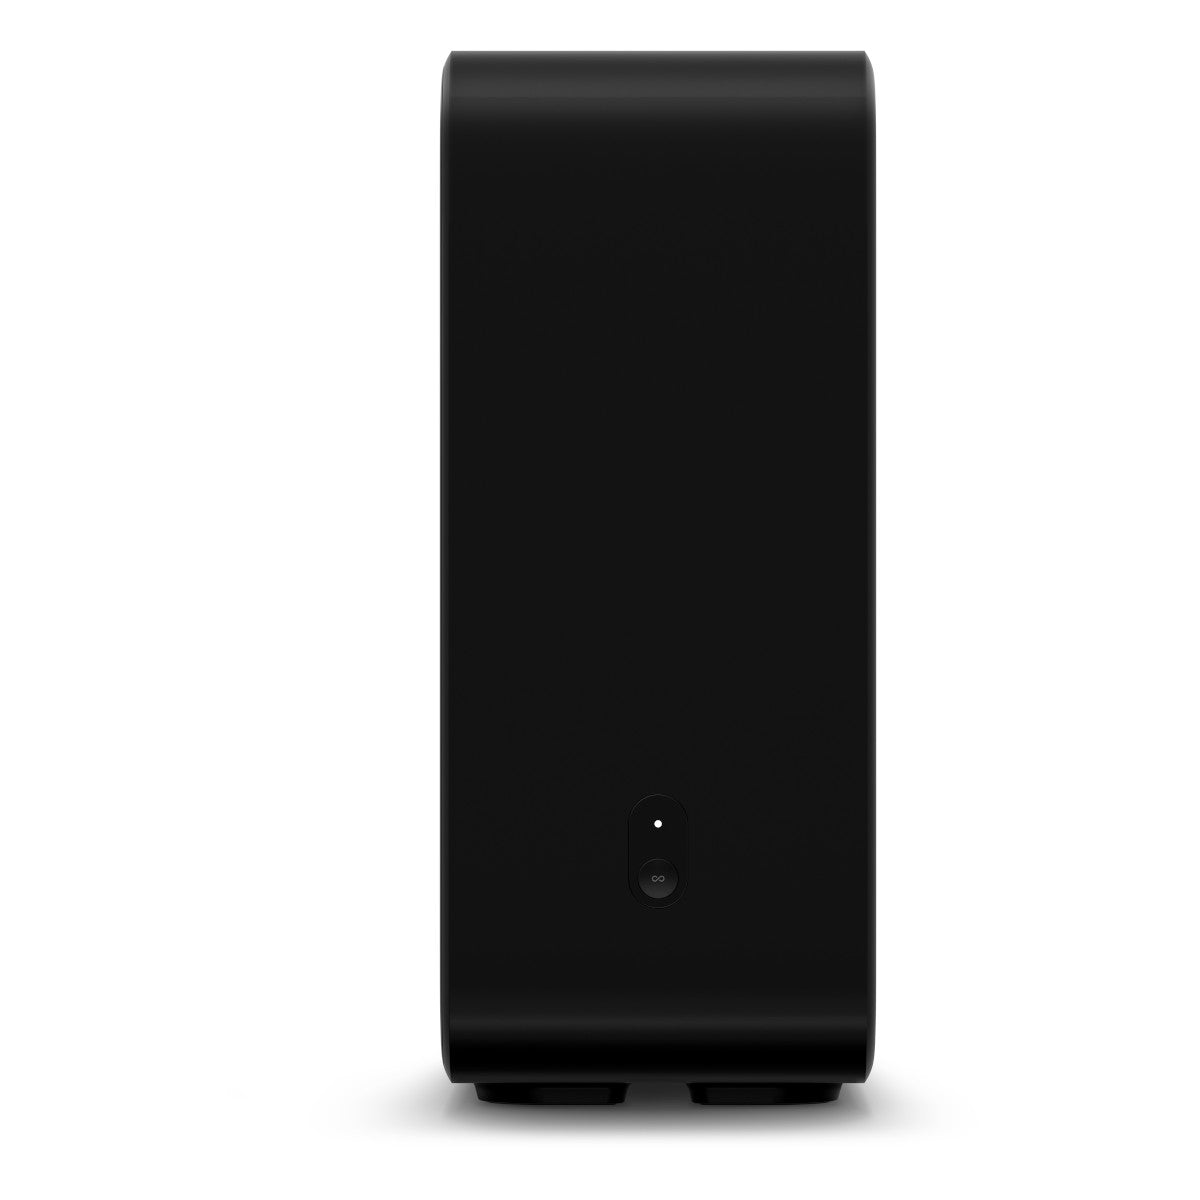 Sonos Sub (Gen 3) Home Theater Stereo Wireless Wide World for Subwoofer (Black) 